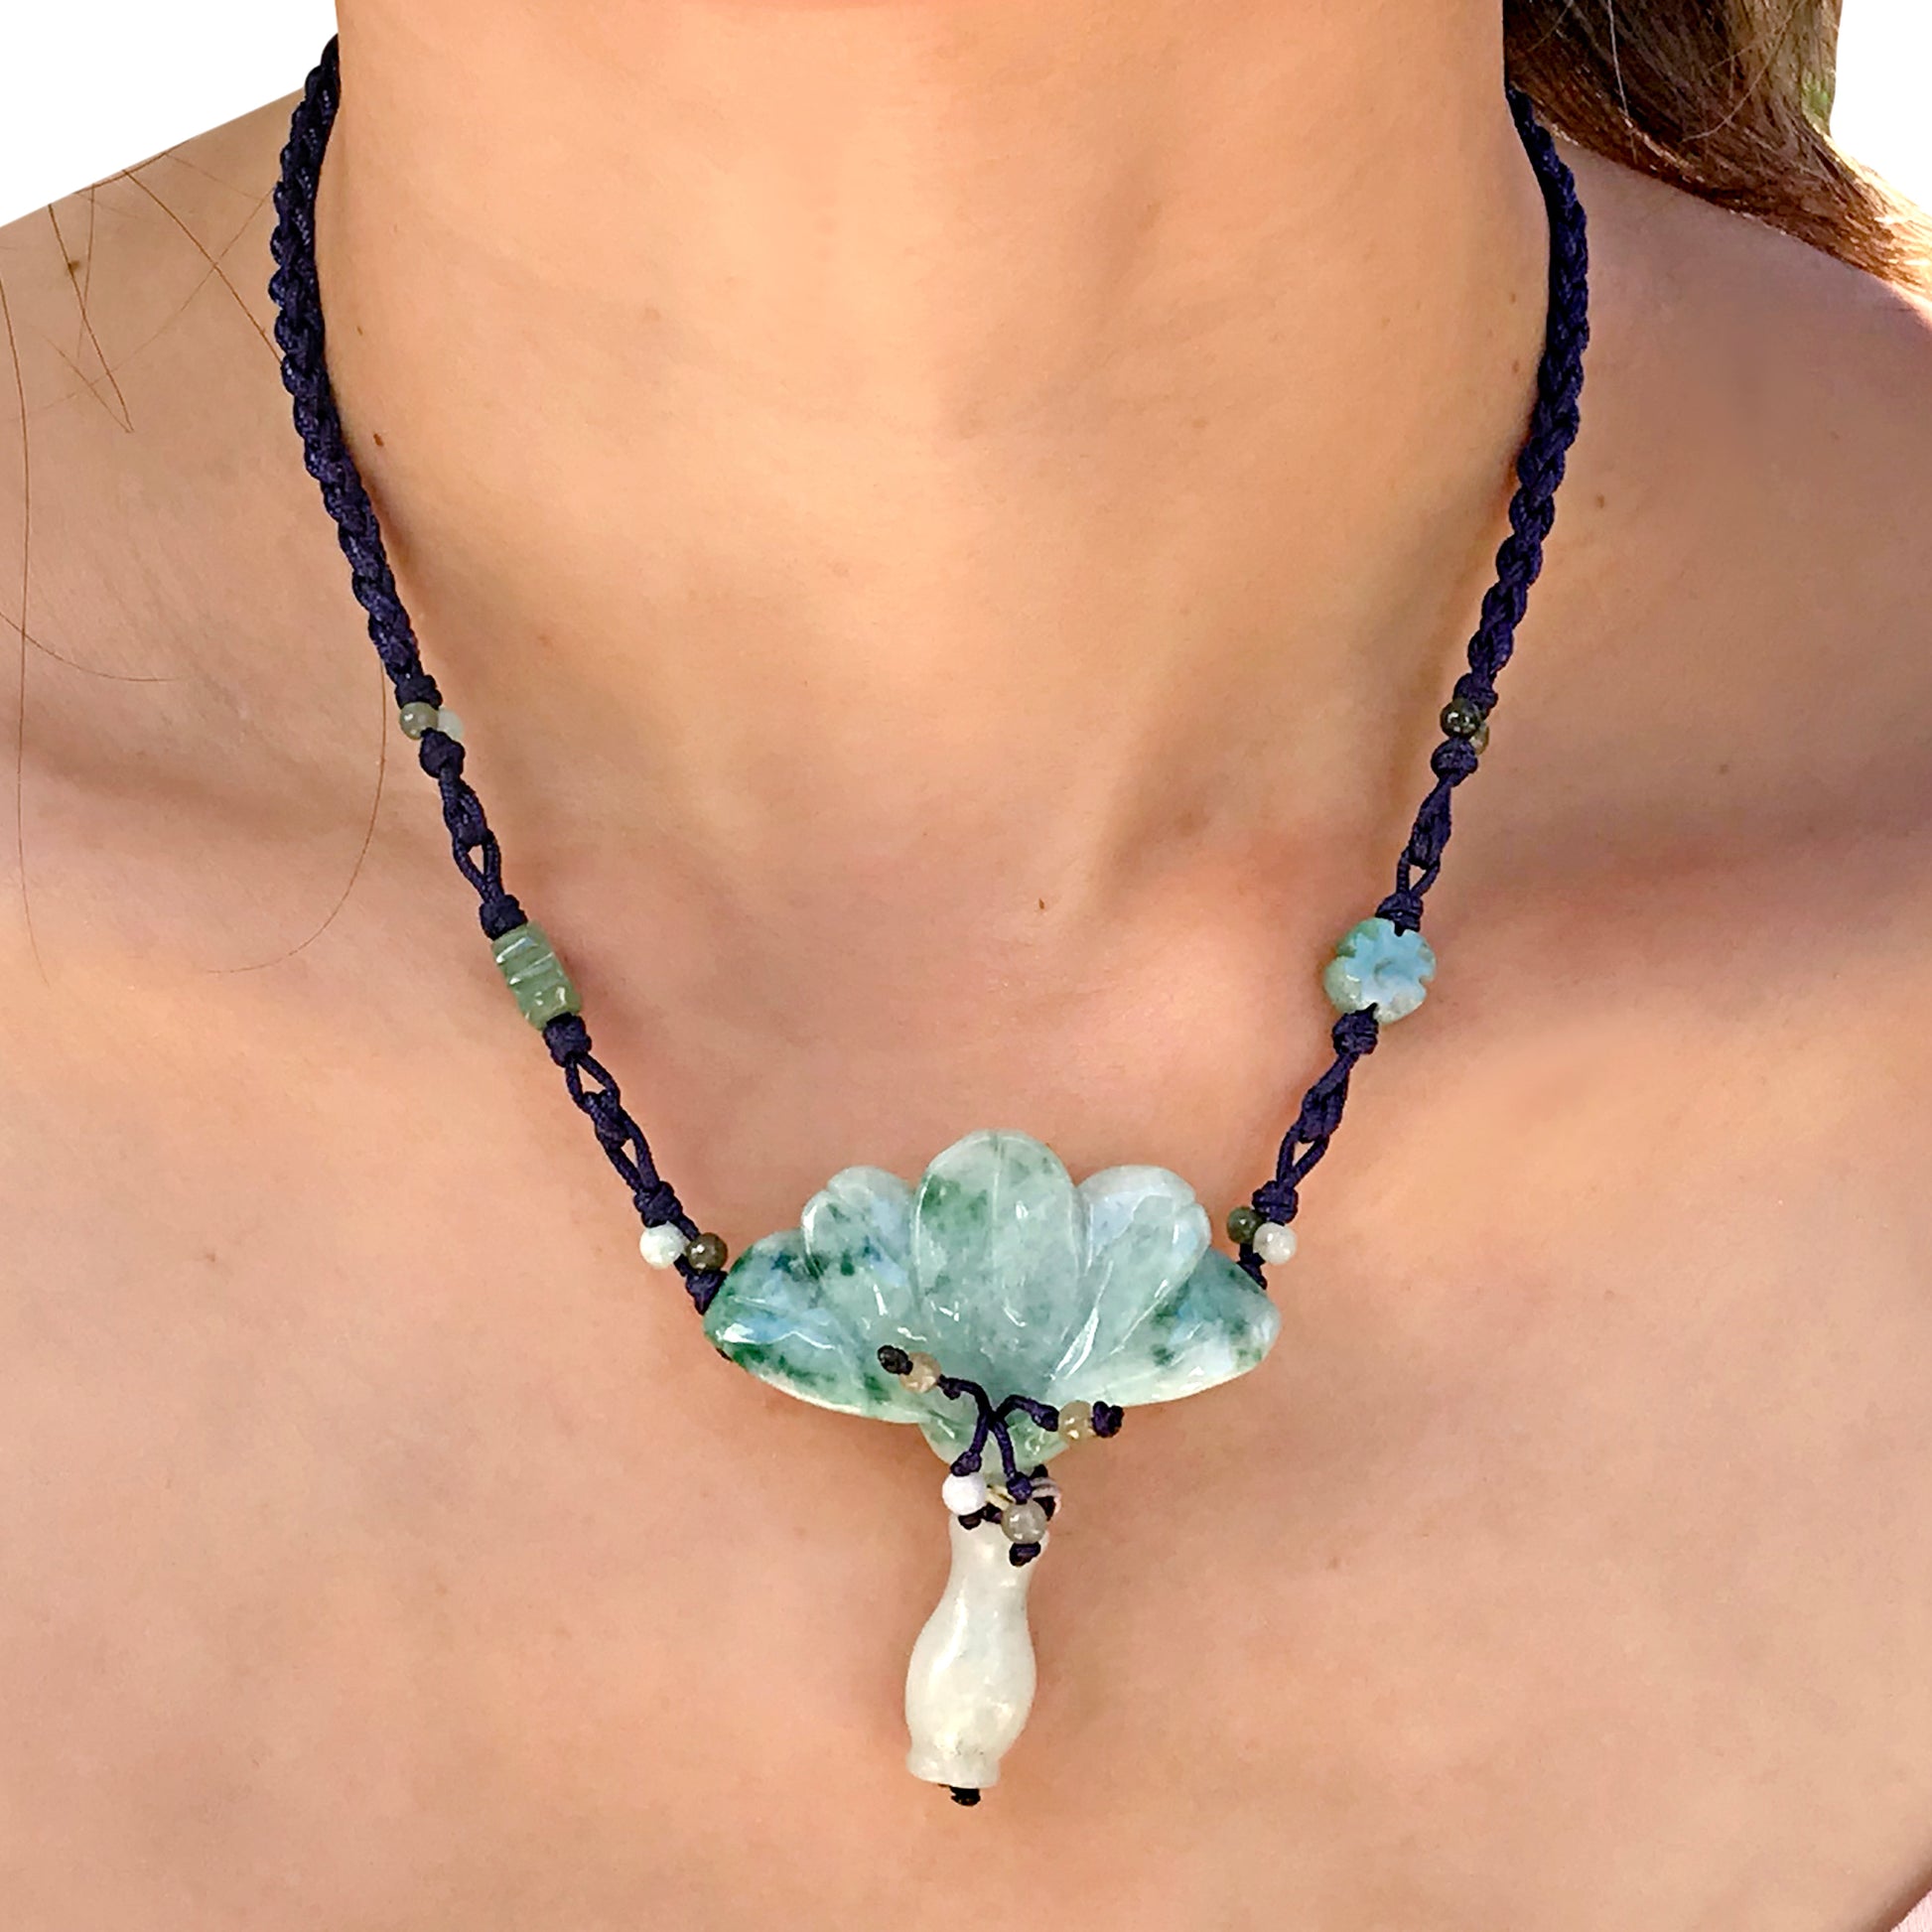 Achieve Beauty and Integrity with Peacock Flower Jade Necklace with Black Cord